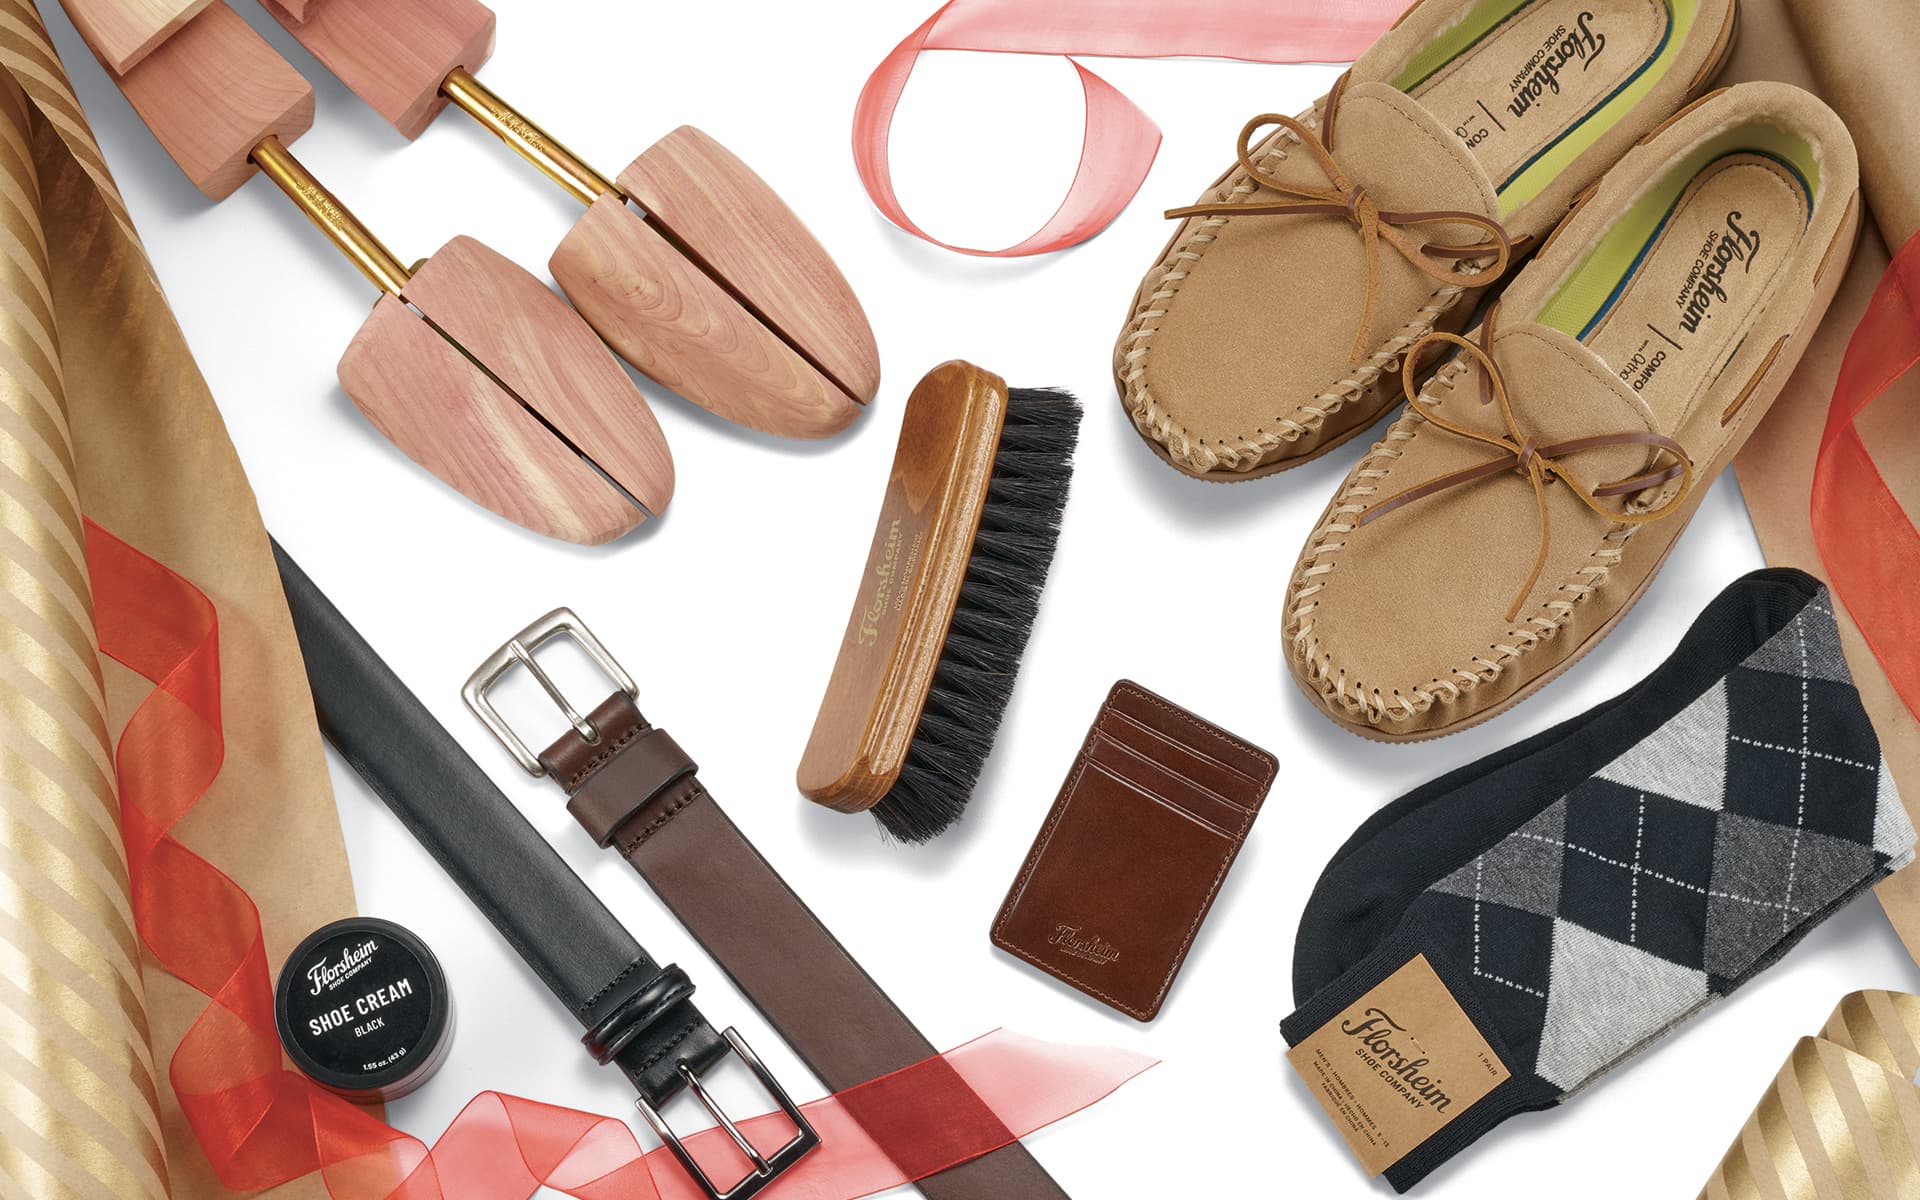 Click to shop our holiday gift guide! Image features a variety of Florsheim products.